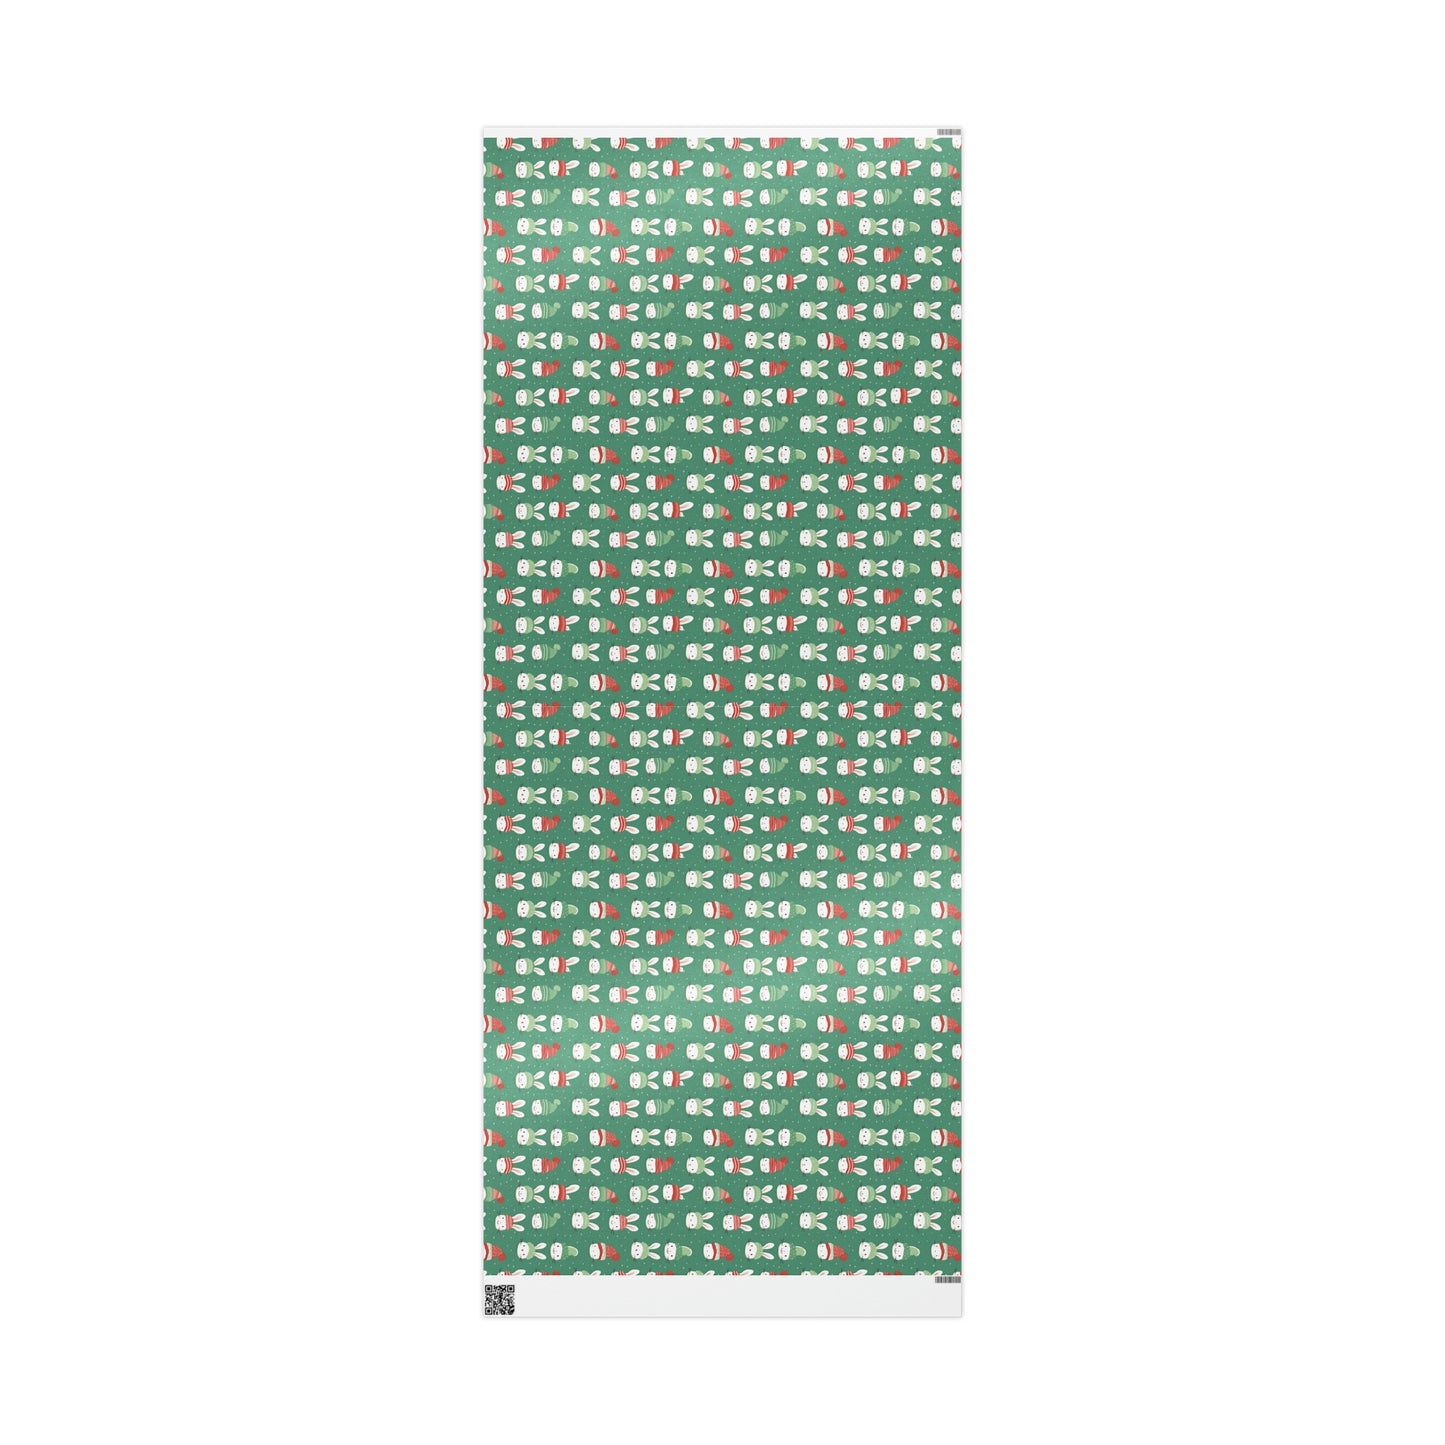 Xmas Gift Wrap 6ft Roll